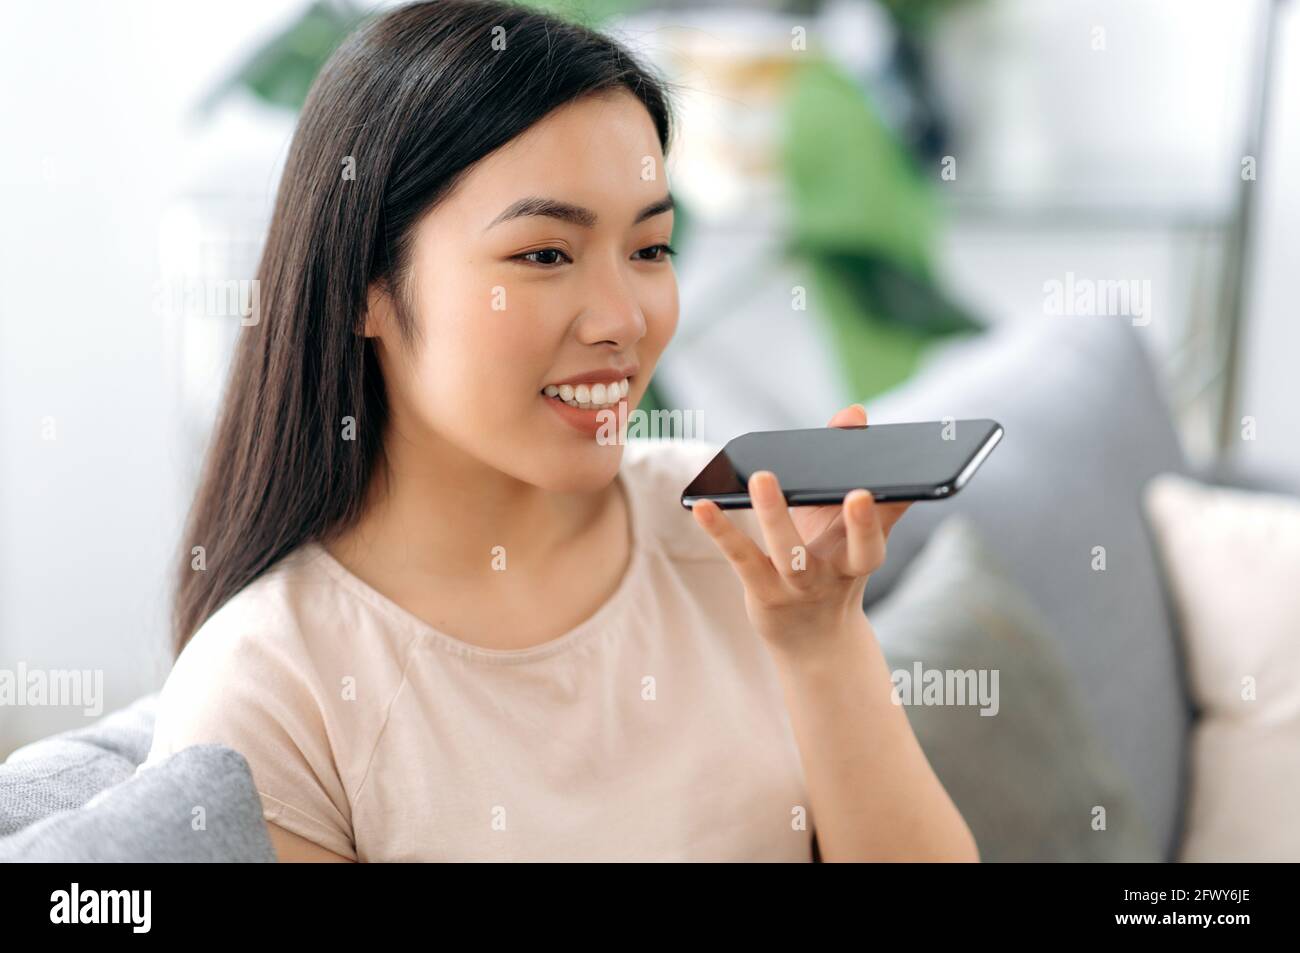 Young happy beautiful positive asian long haired girl, sitting on sofa, wearing t-shirt, using smartphone, chatting with friends or family on speakerphone or recording audio message, smiles friendly Stock Photo